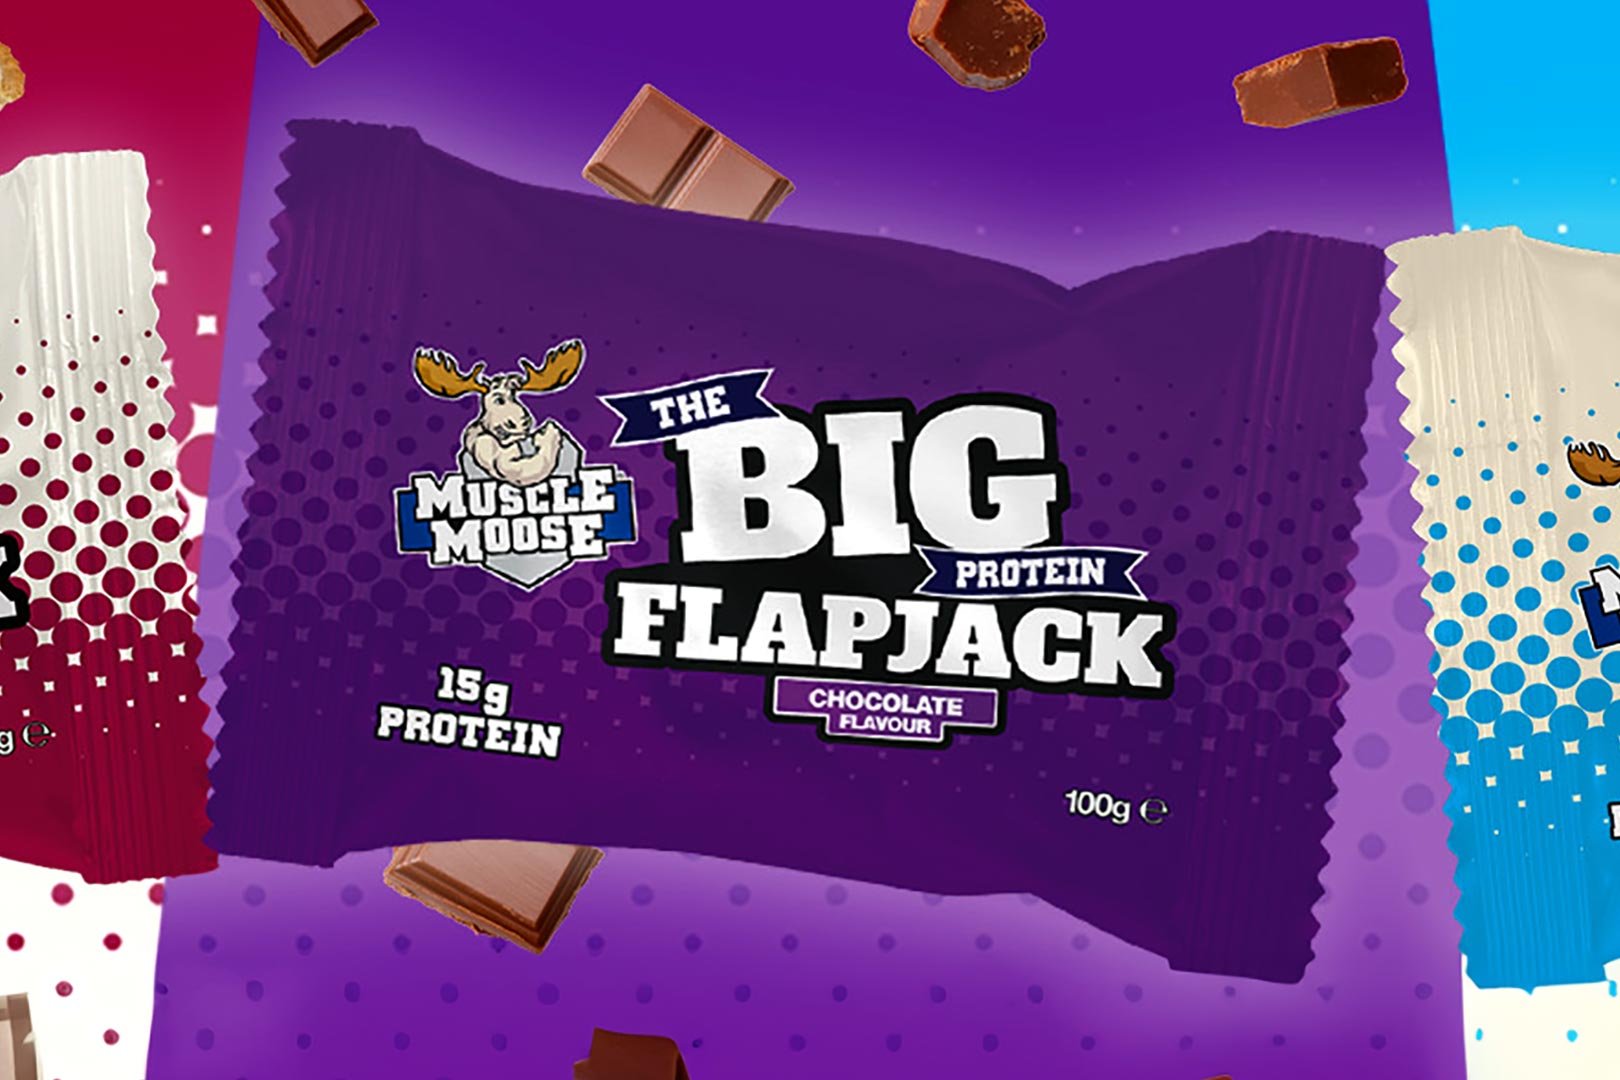 Muscle Moose Three More Big Protein Flapjack Flavors